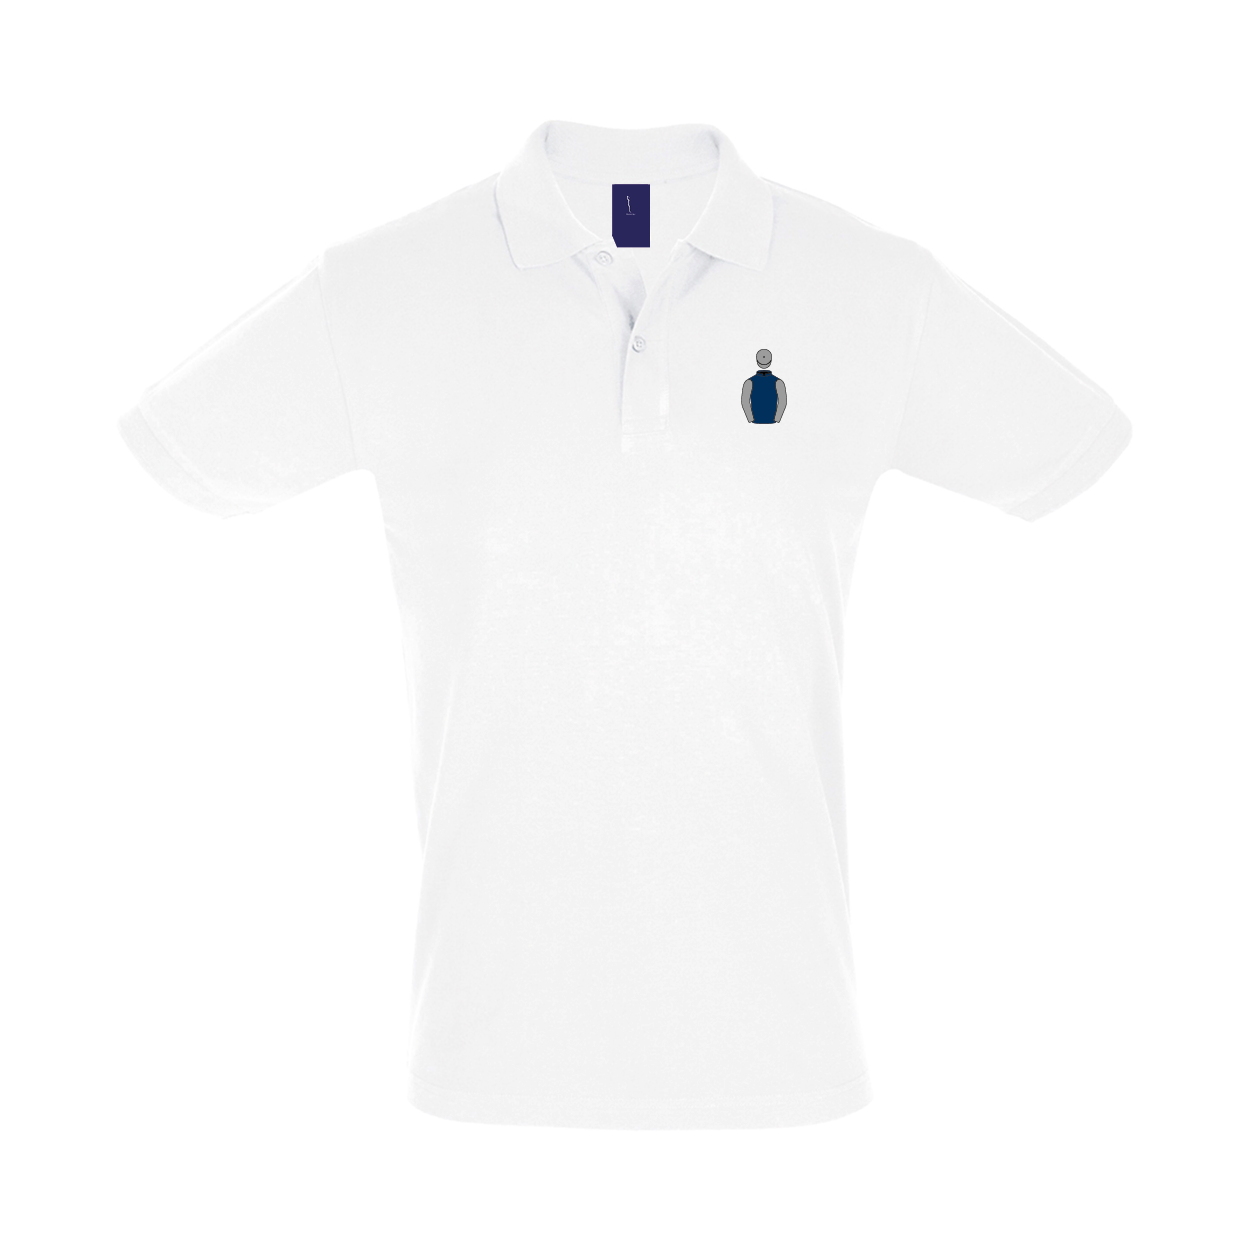 Ladies R Burridge Embroidered Polo Shirt - Clothing - Hacked Up